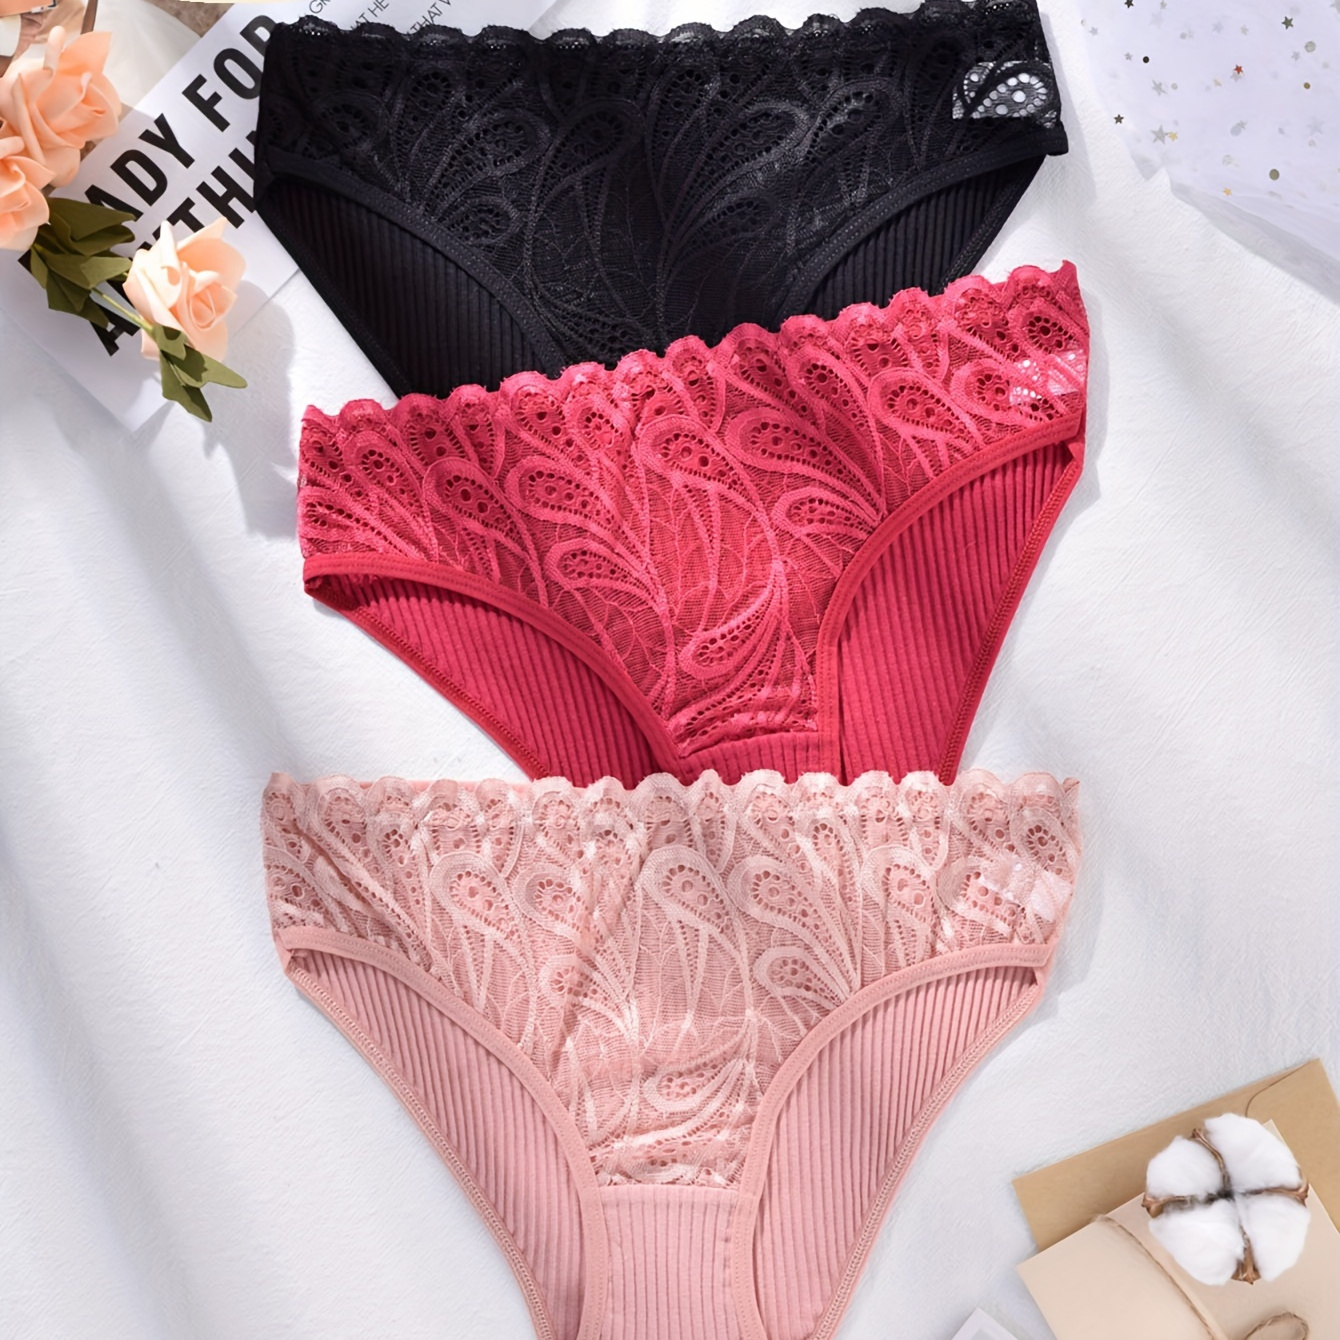 

3pcs Solid Contrast Lace Ribbed Briefs, Comfy Breathable Stretchy Intimates Panties, Women's Lingerie & Underwear